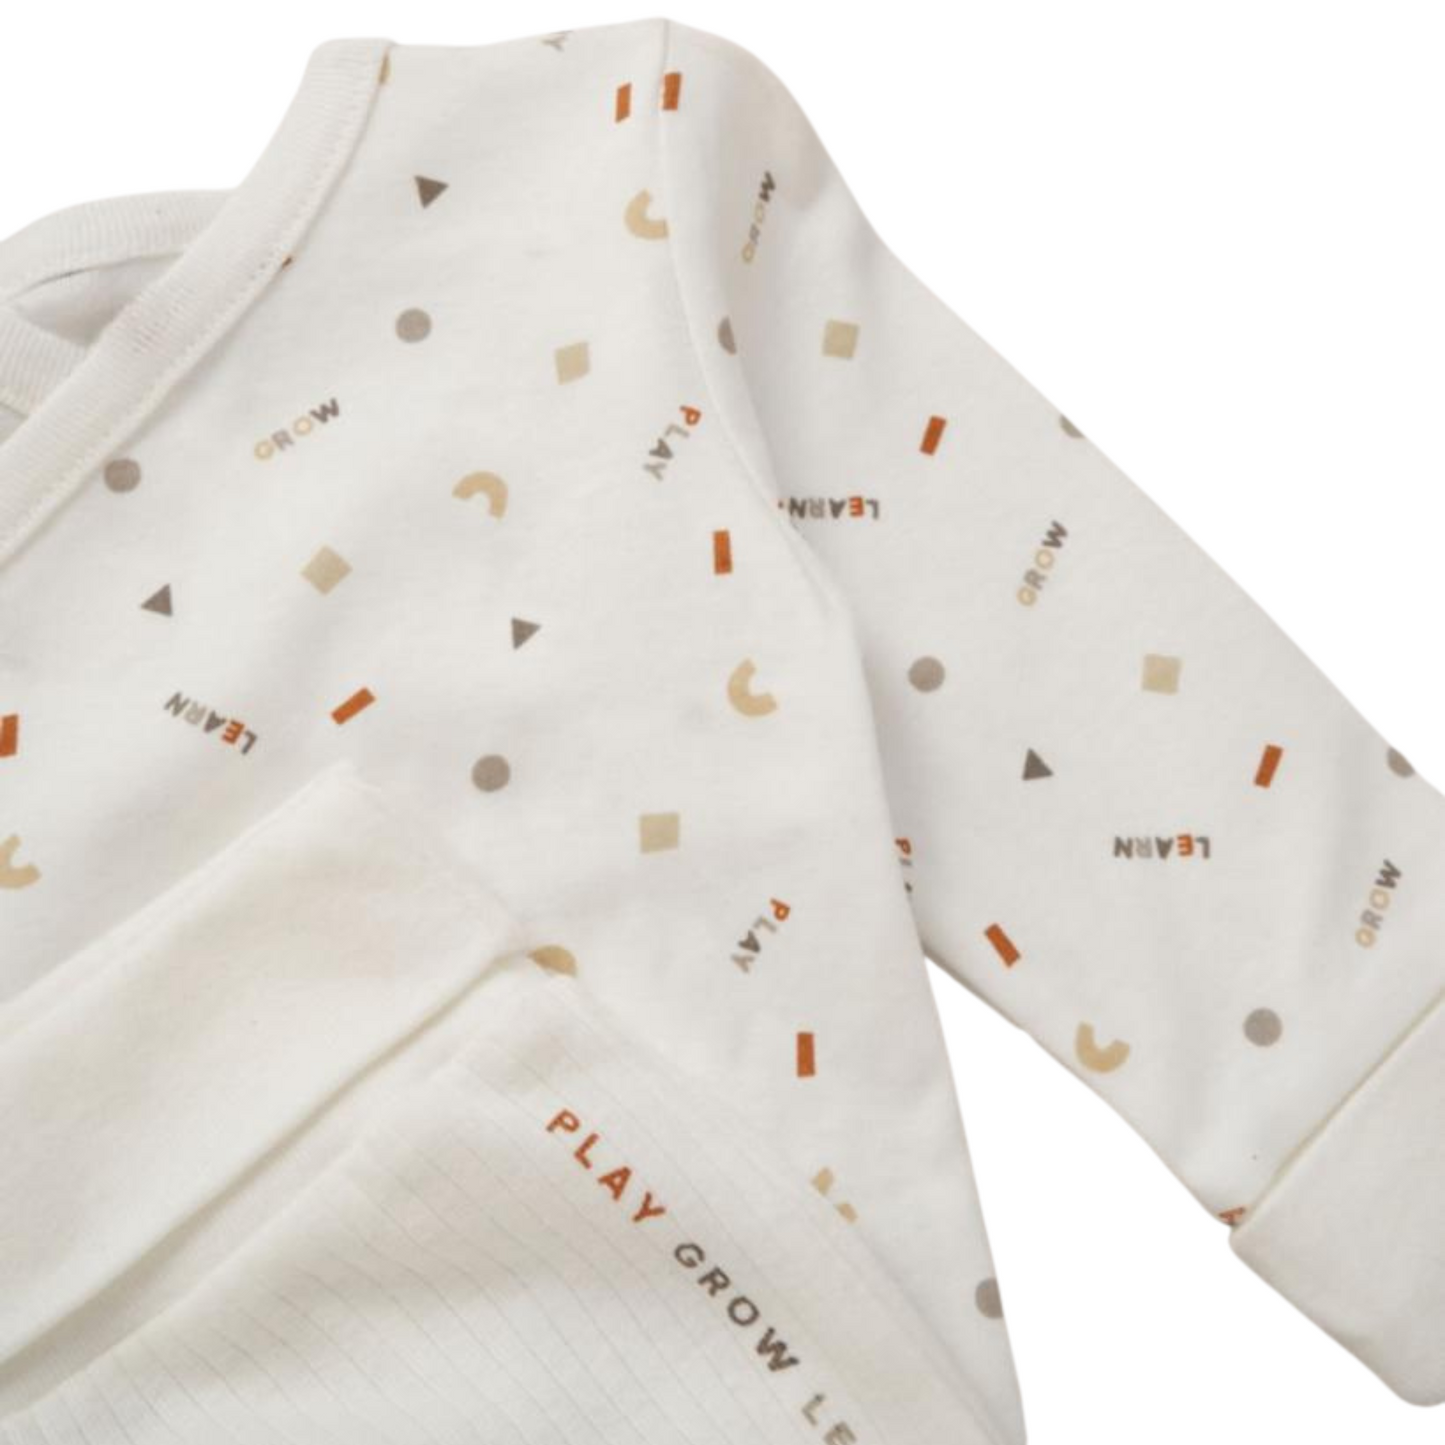 Image of a three-piece organic baby clothes set, including a long-sleeved bodysuit, ribbed trousers and an adorable bib, made from soft organic cotton